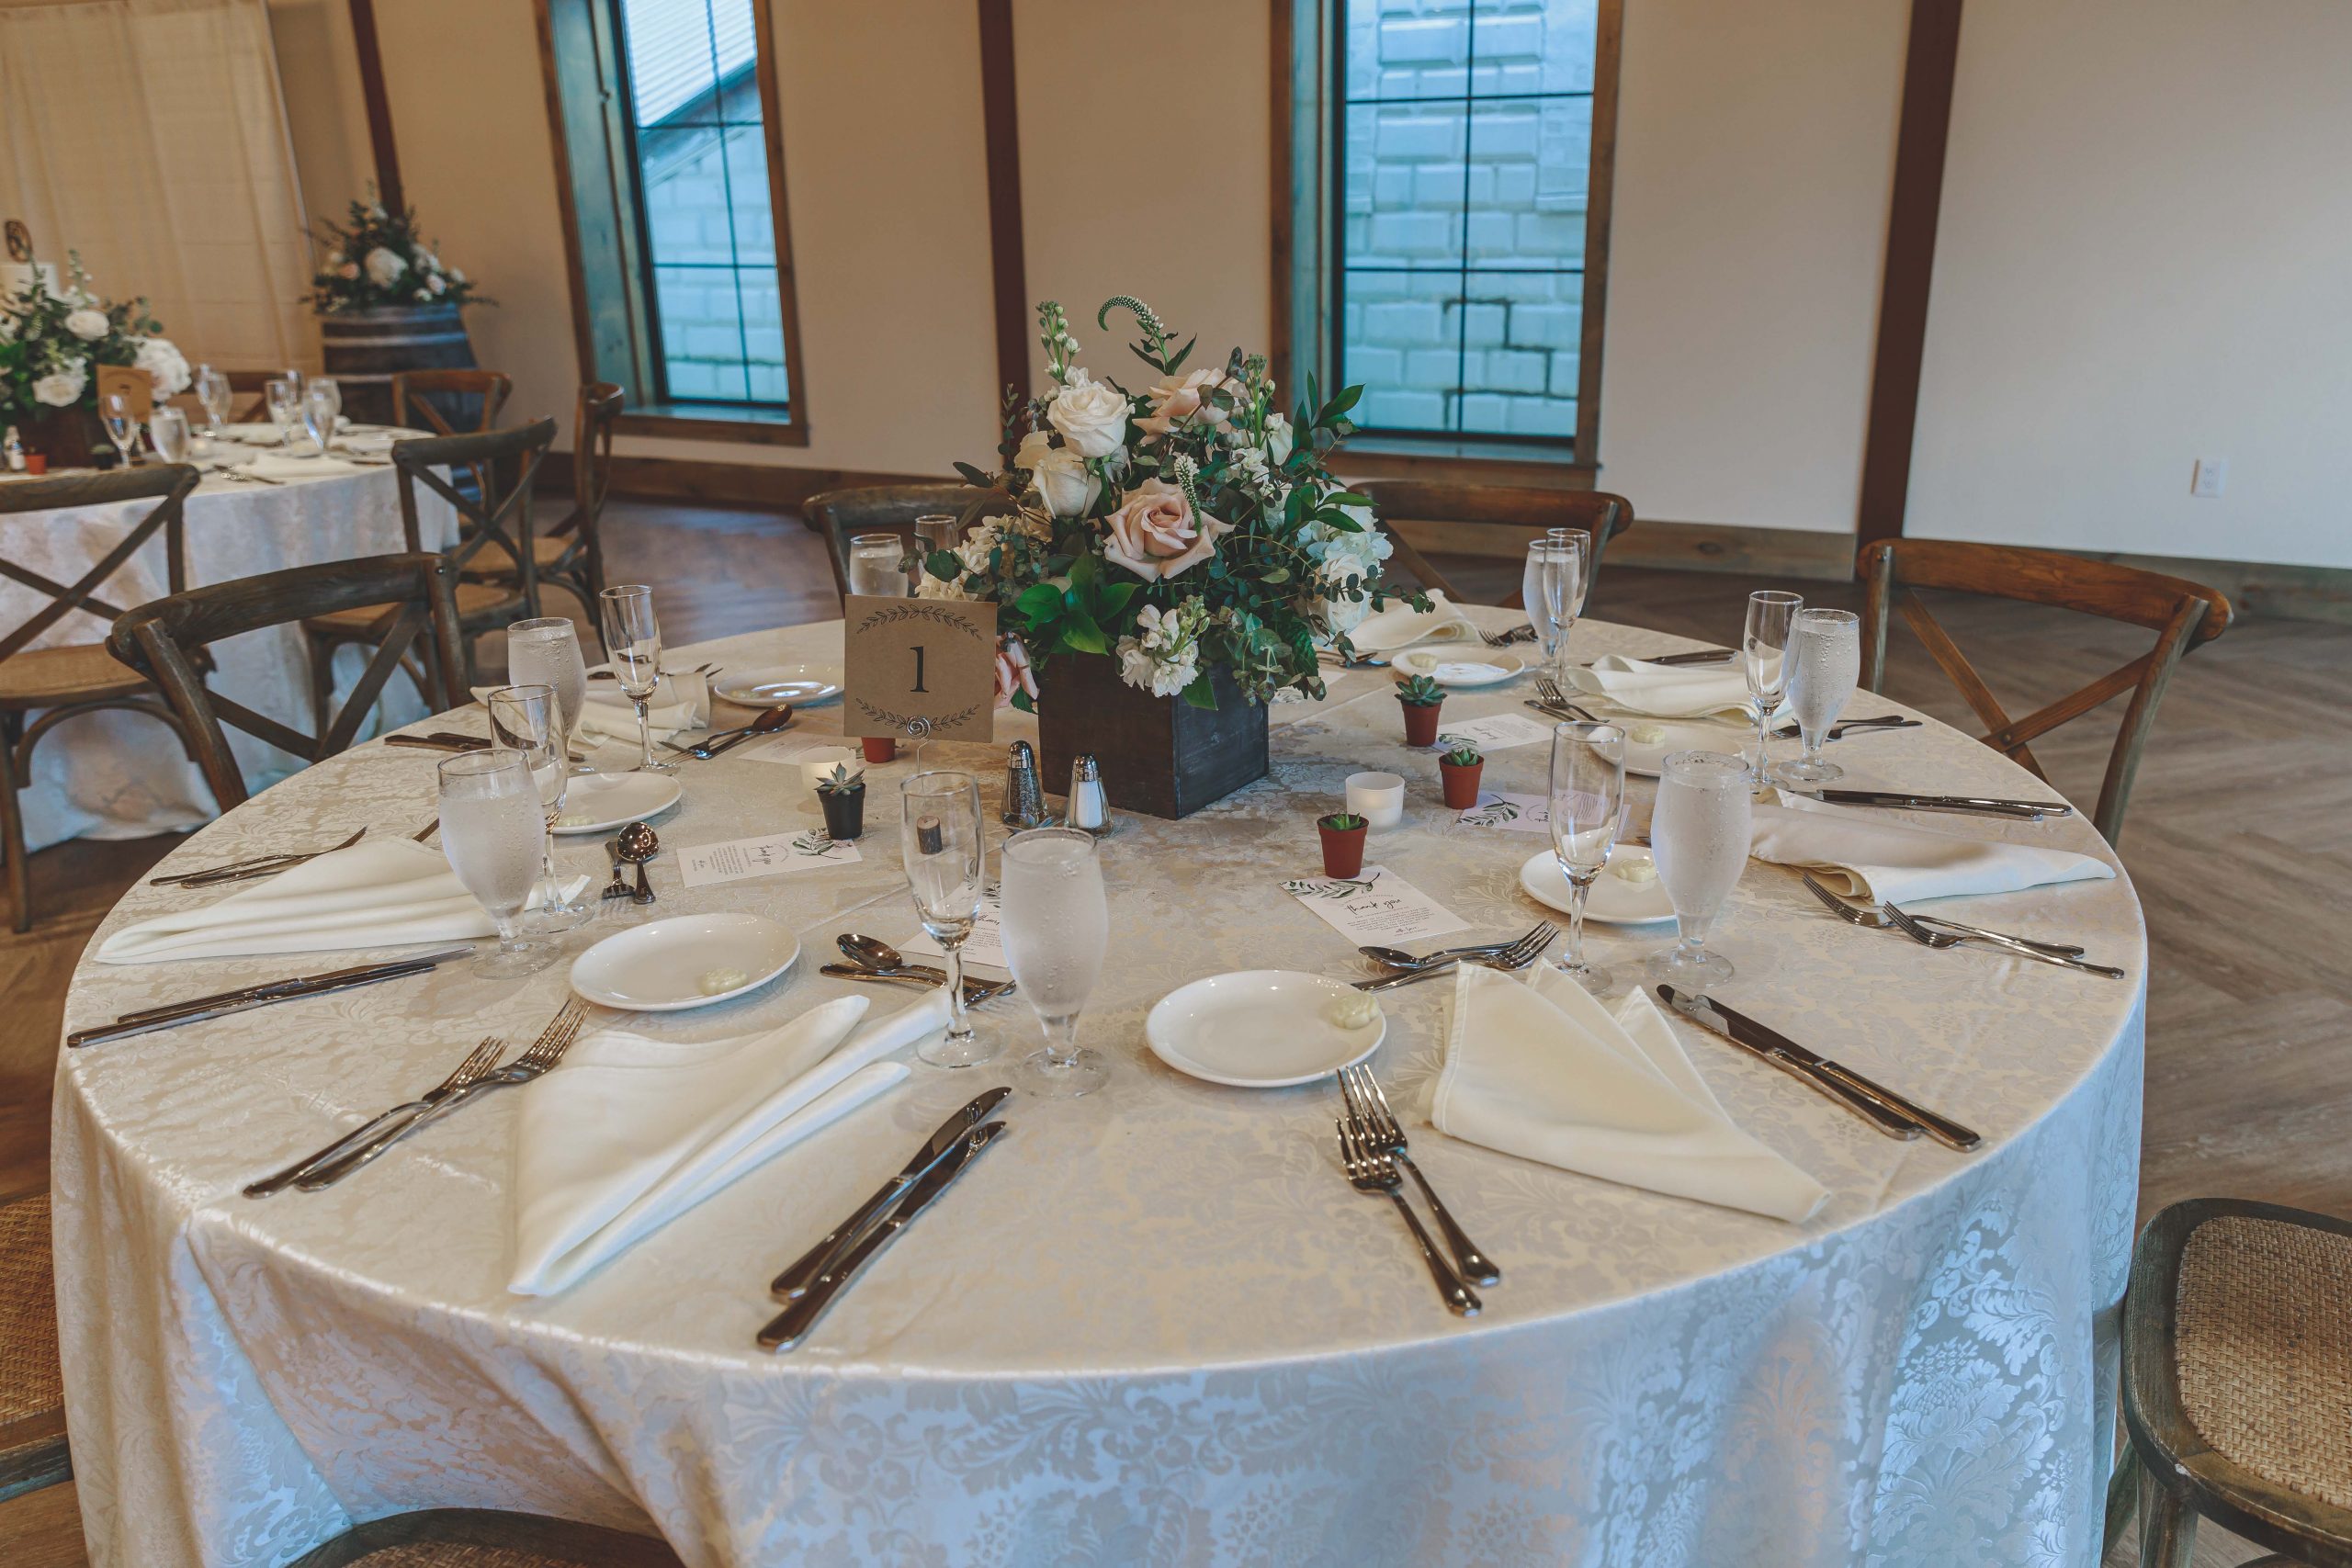 Renault Winery South Jersey wedding venue